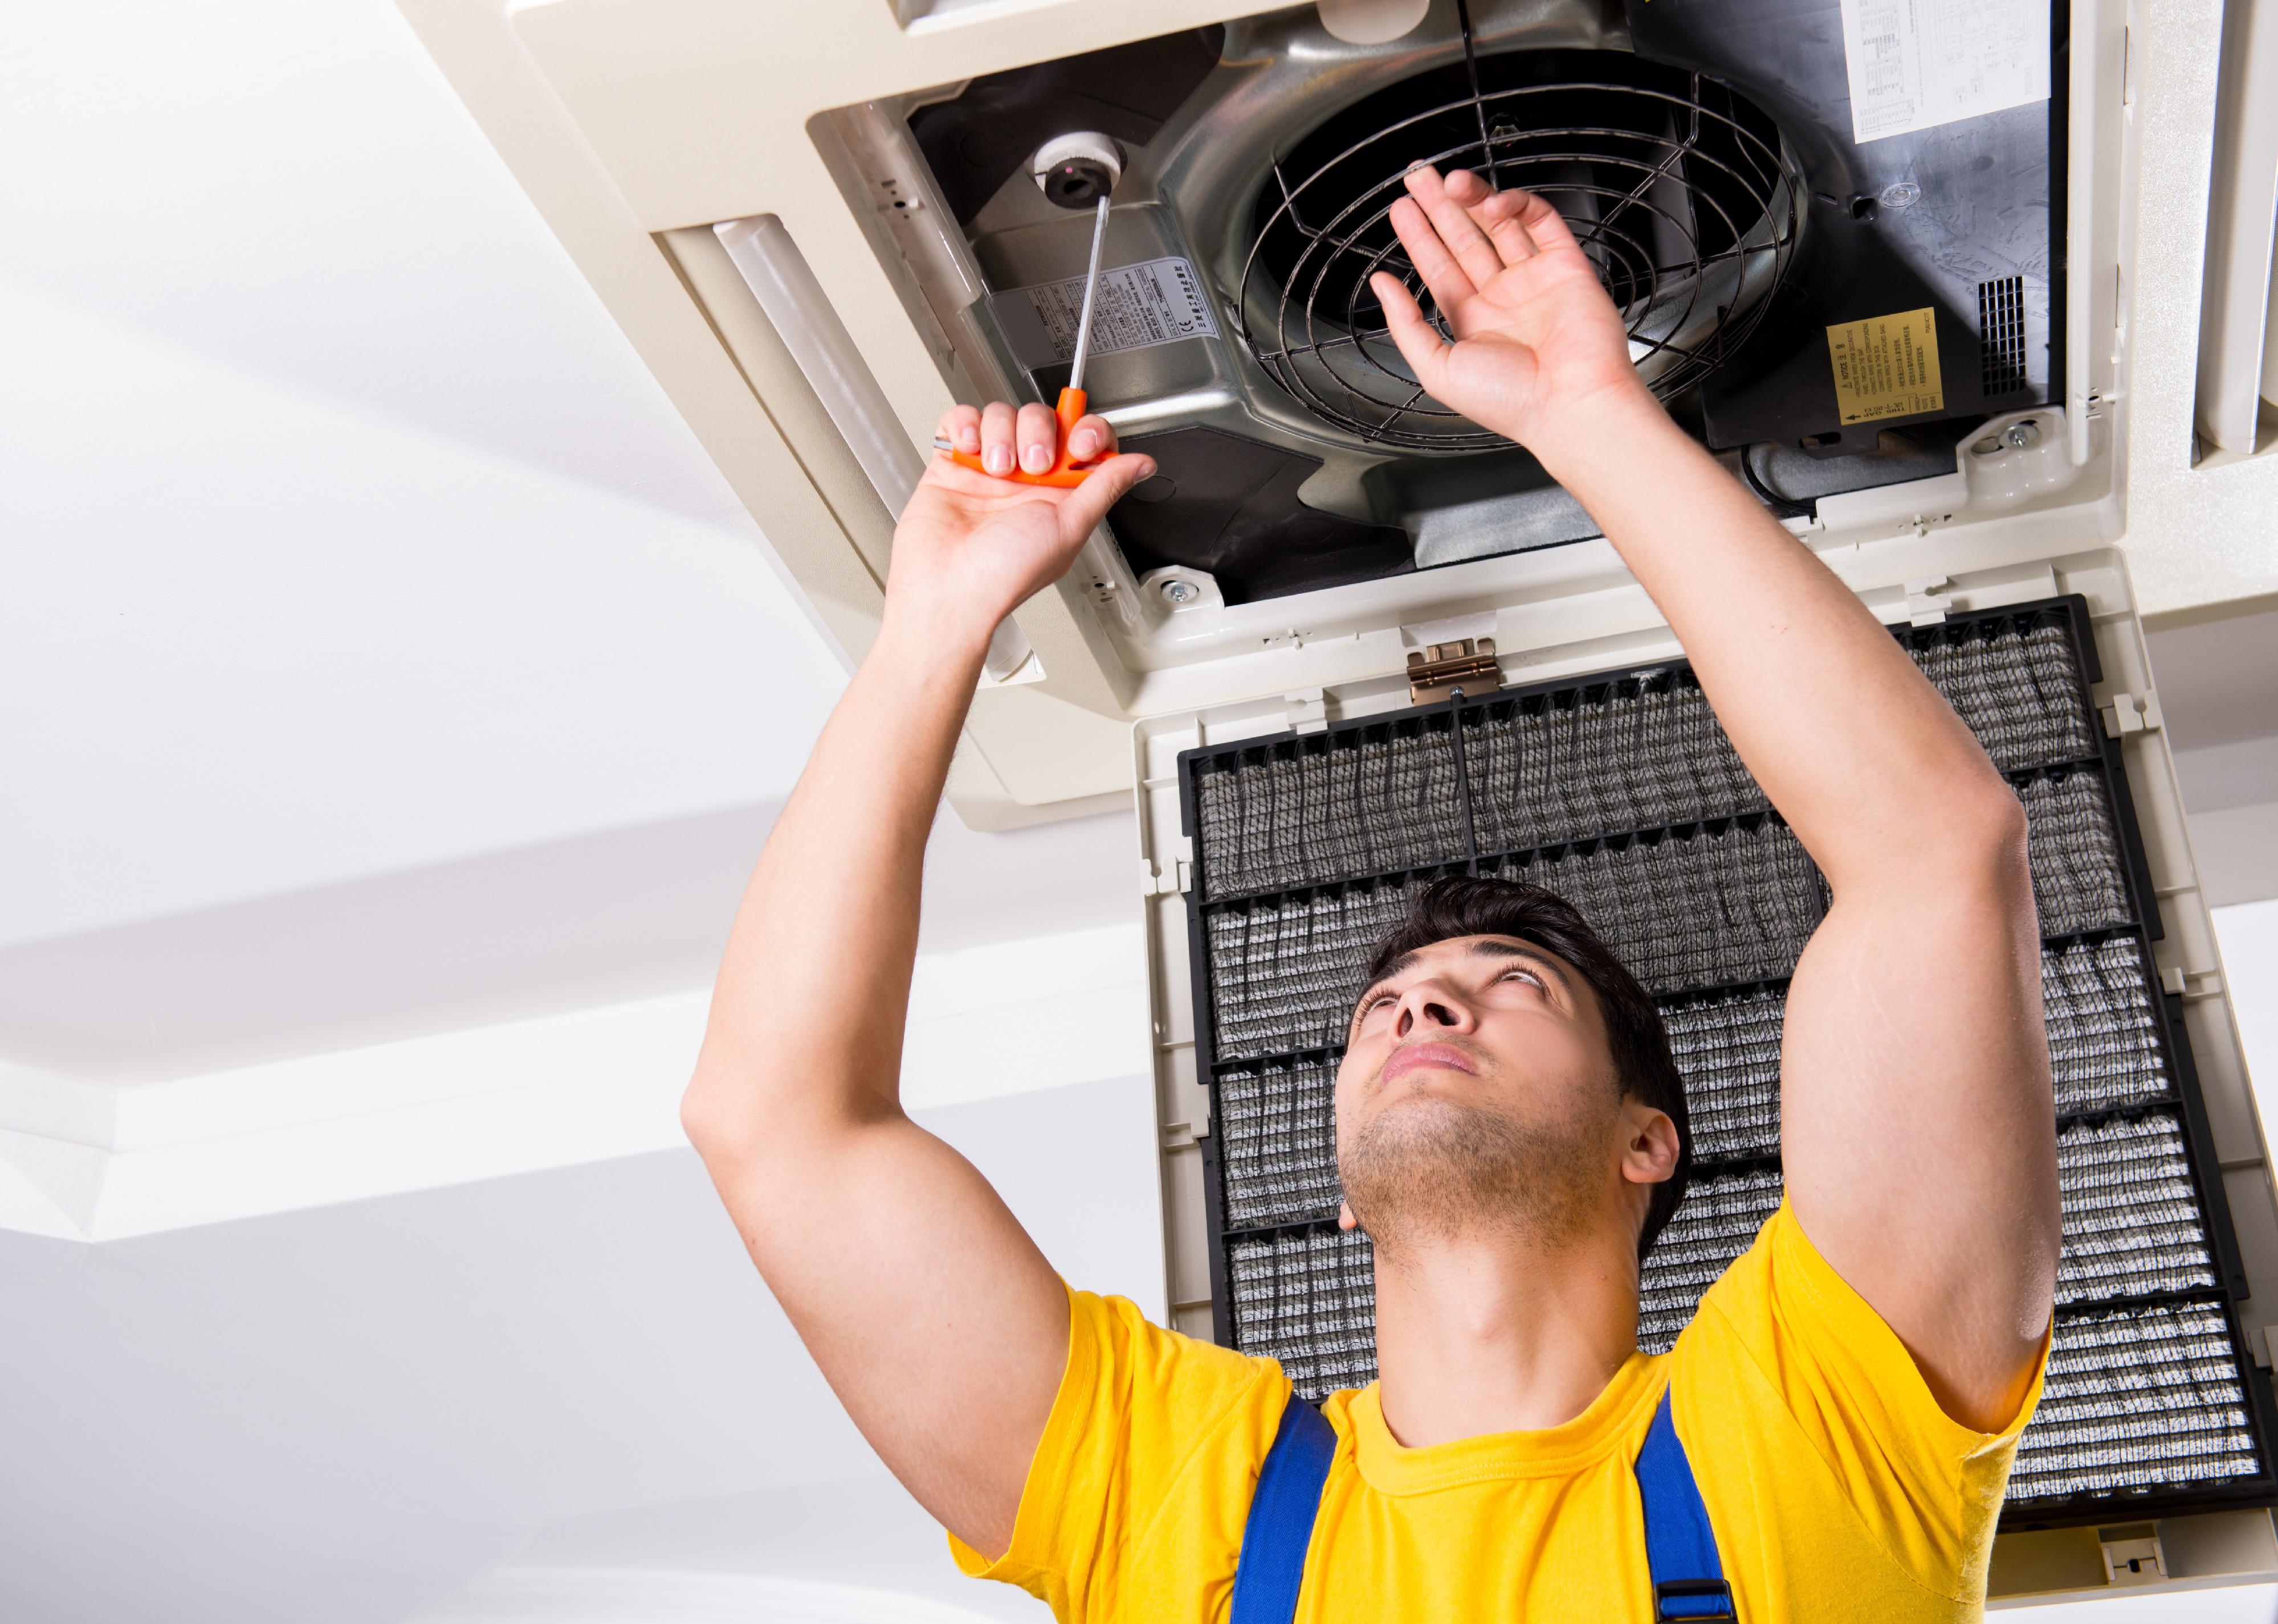 A contractor inspects a home's HVAC unit